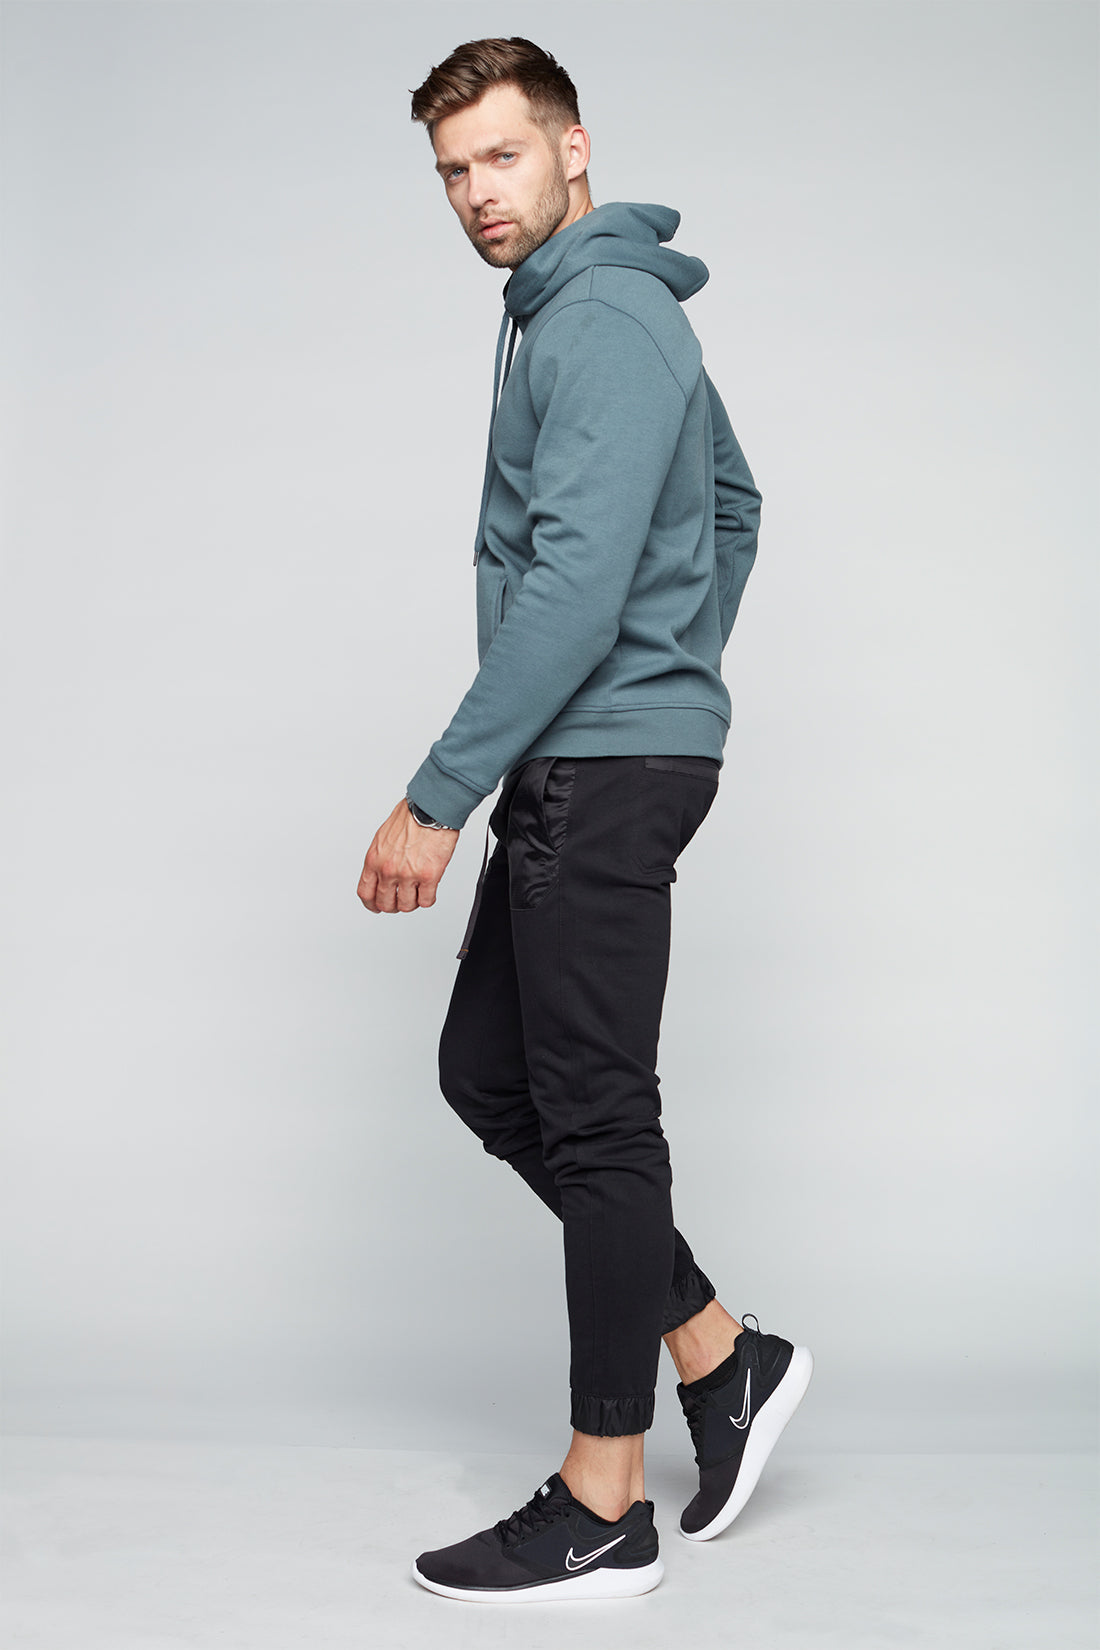 AXEL - Pull-On French Terry Jogger - Black - DENIM SOCIETY™